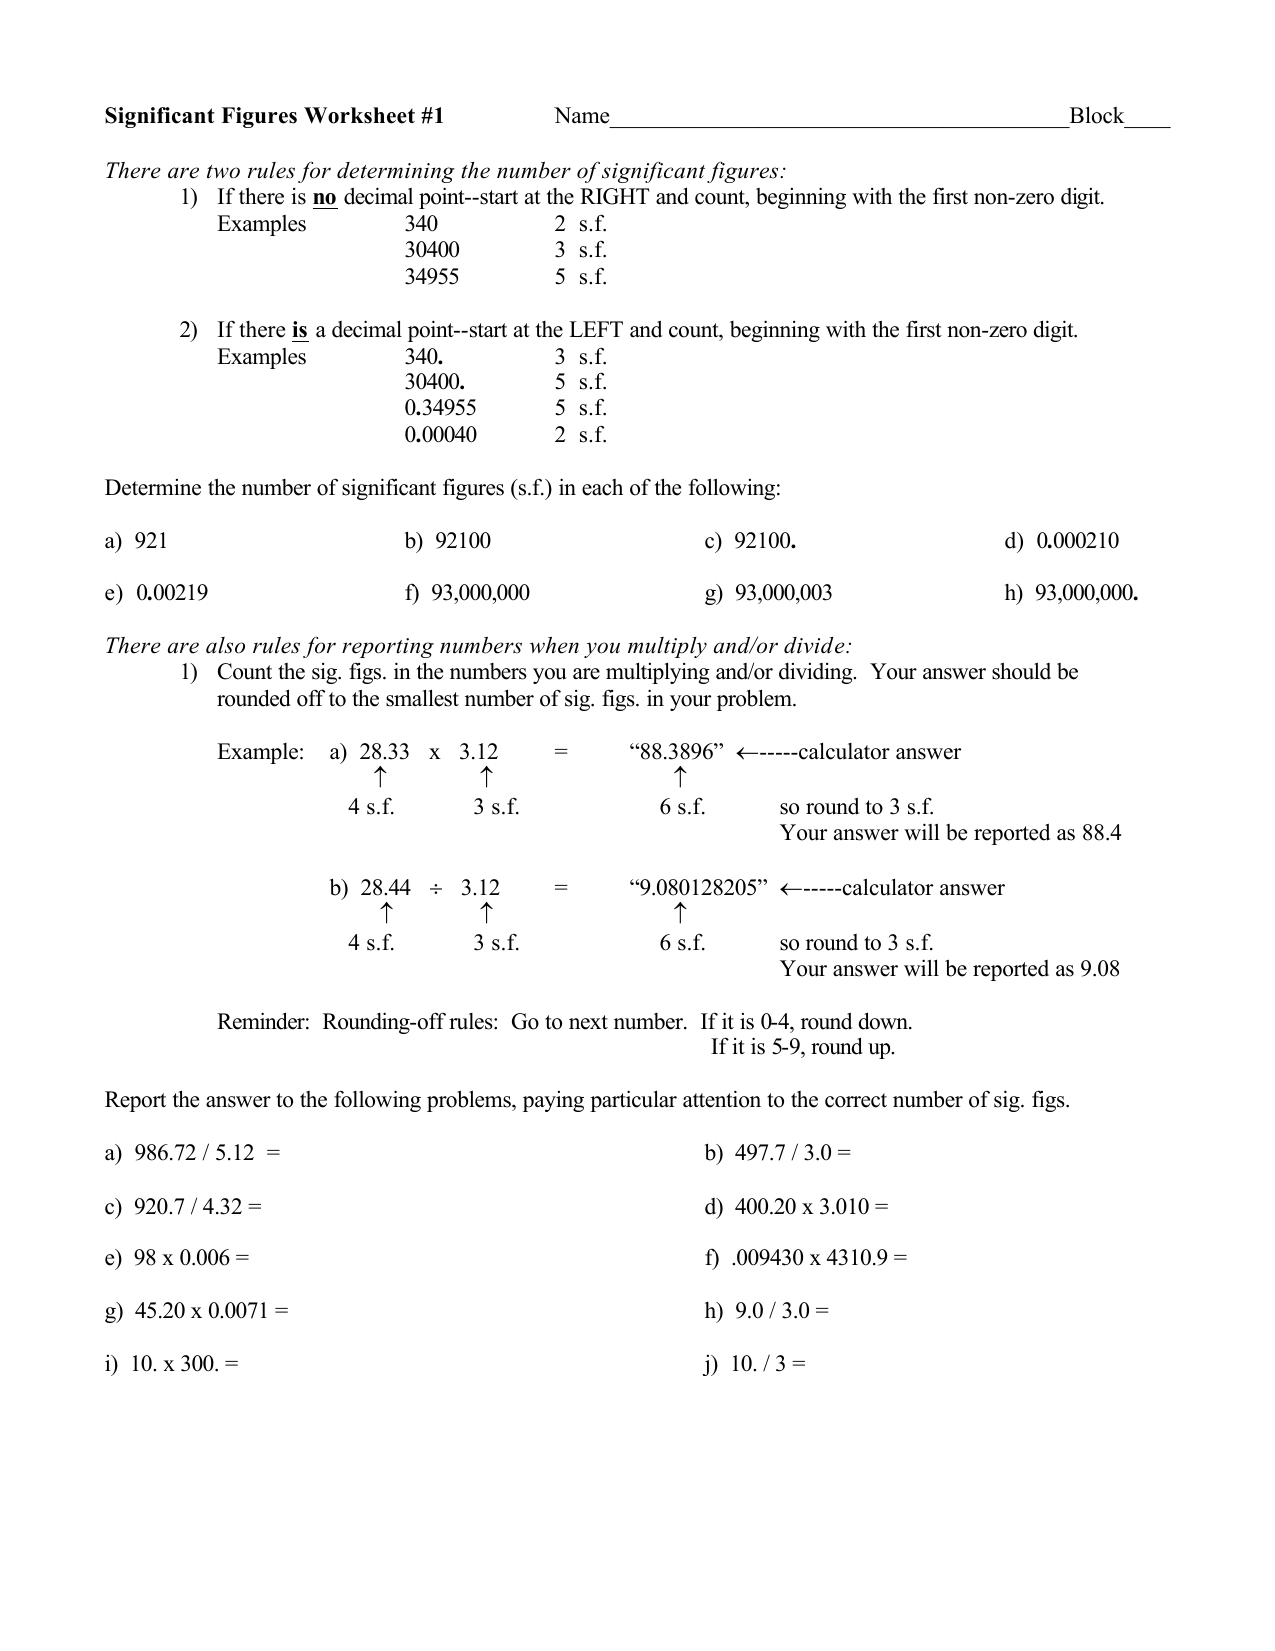 Scientific Notation Significant Figures Worksheet 1 Answers